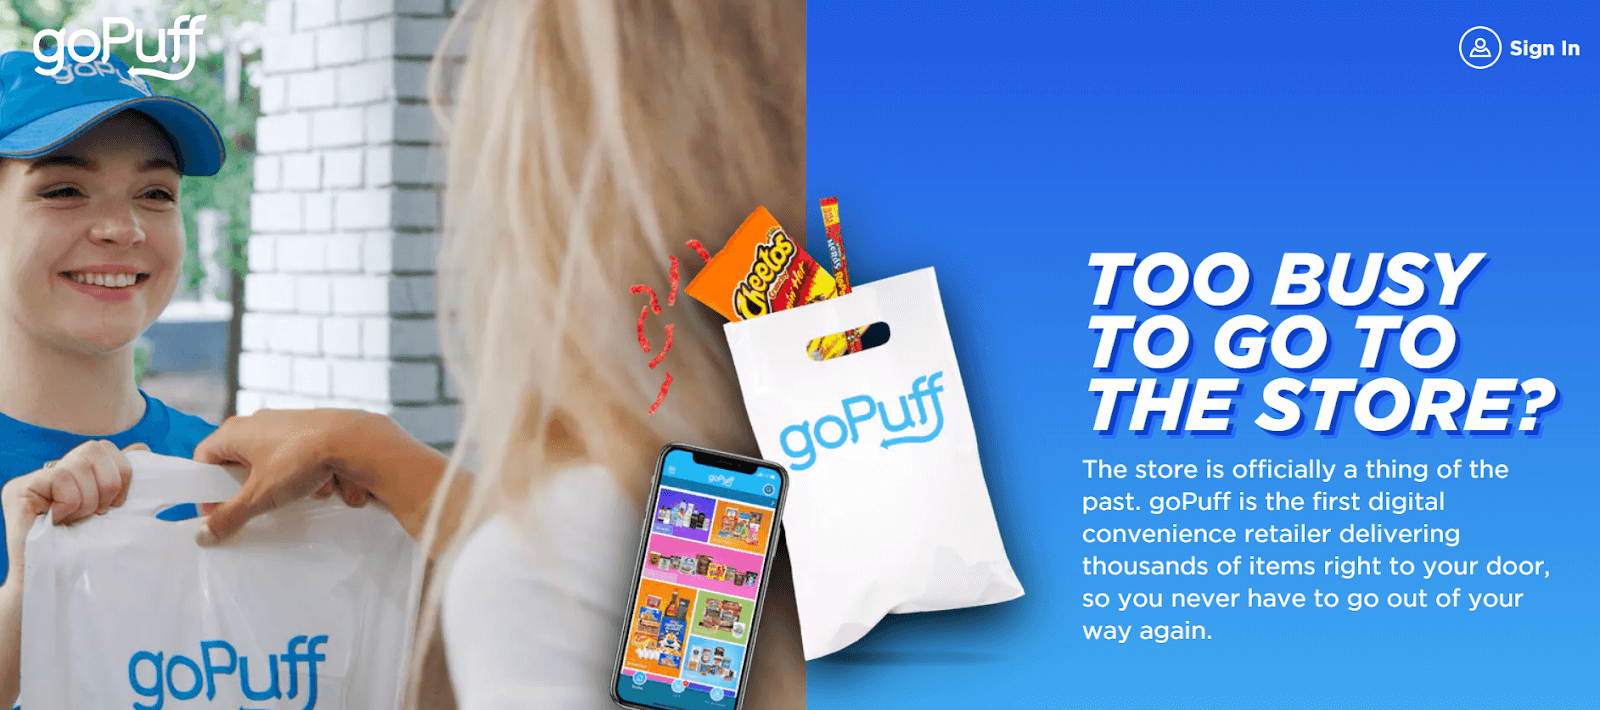 Homepage for GoPuff driver or user